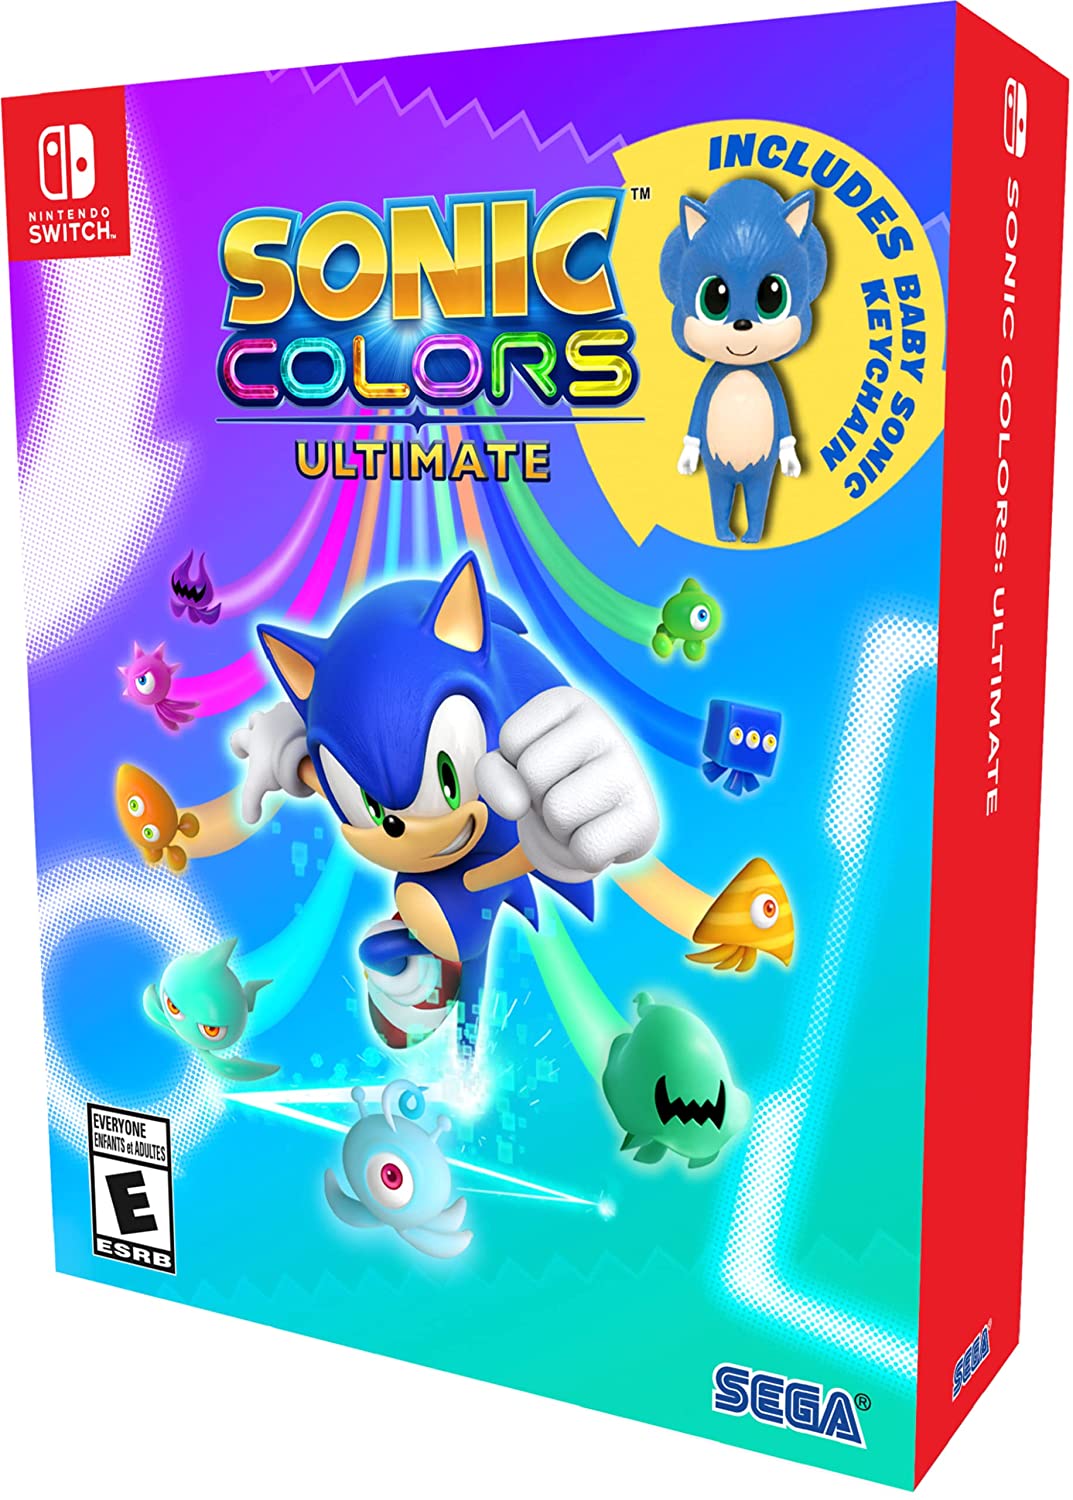 Sonic colours ultimate - nintendo switch